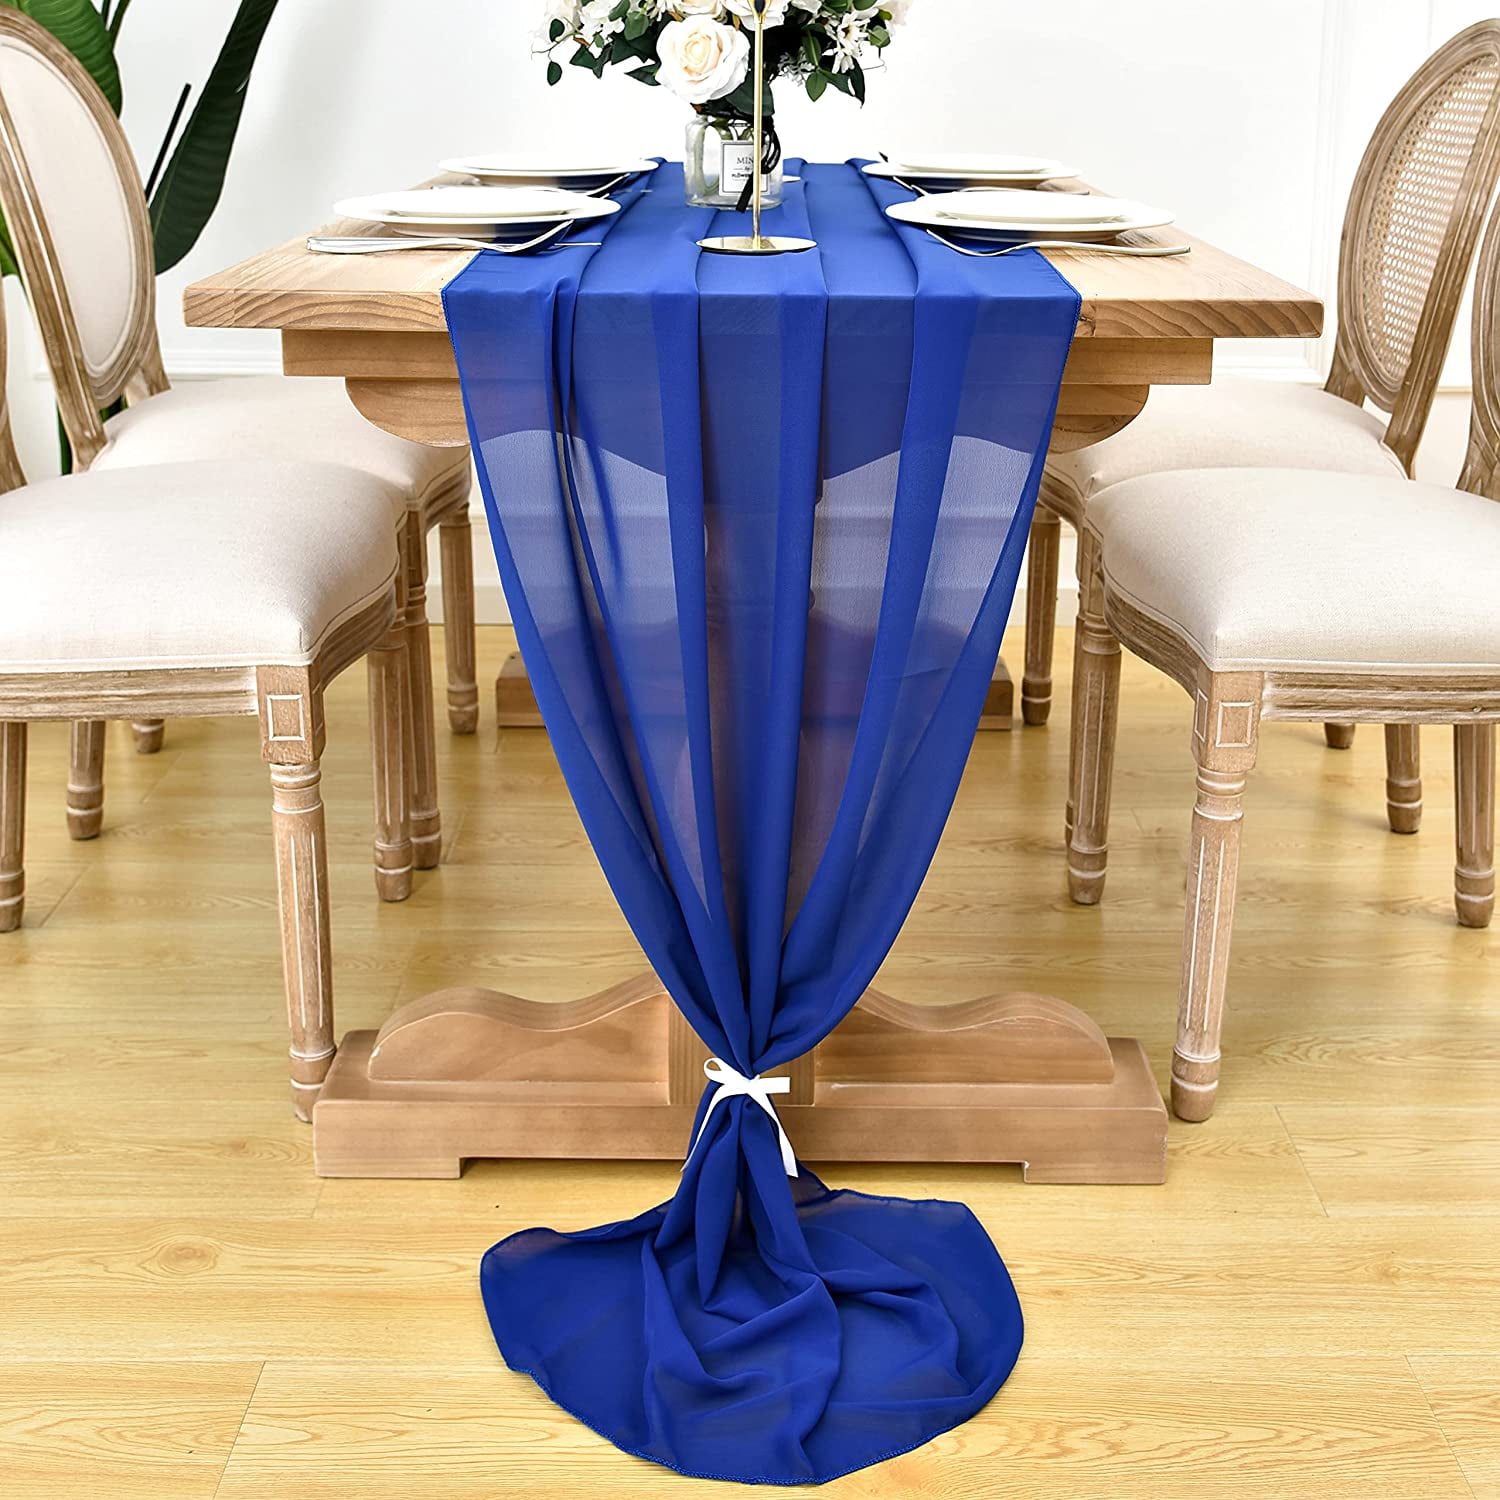 OSVINO 10ft Pearl Table Runner 63x120 Inches Blue Chiffon Romantic